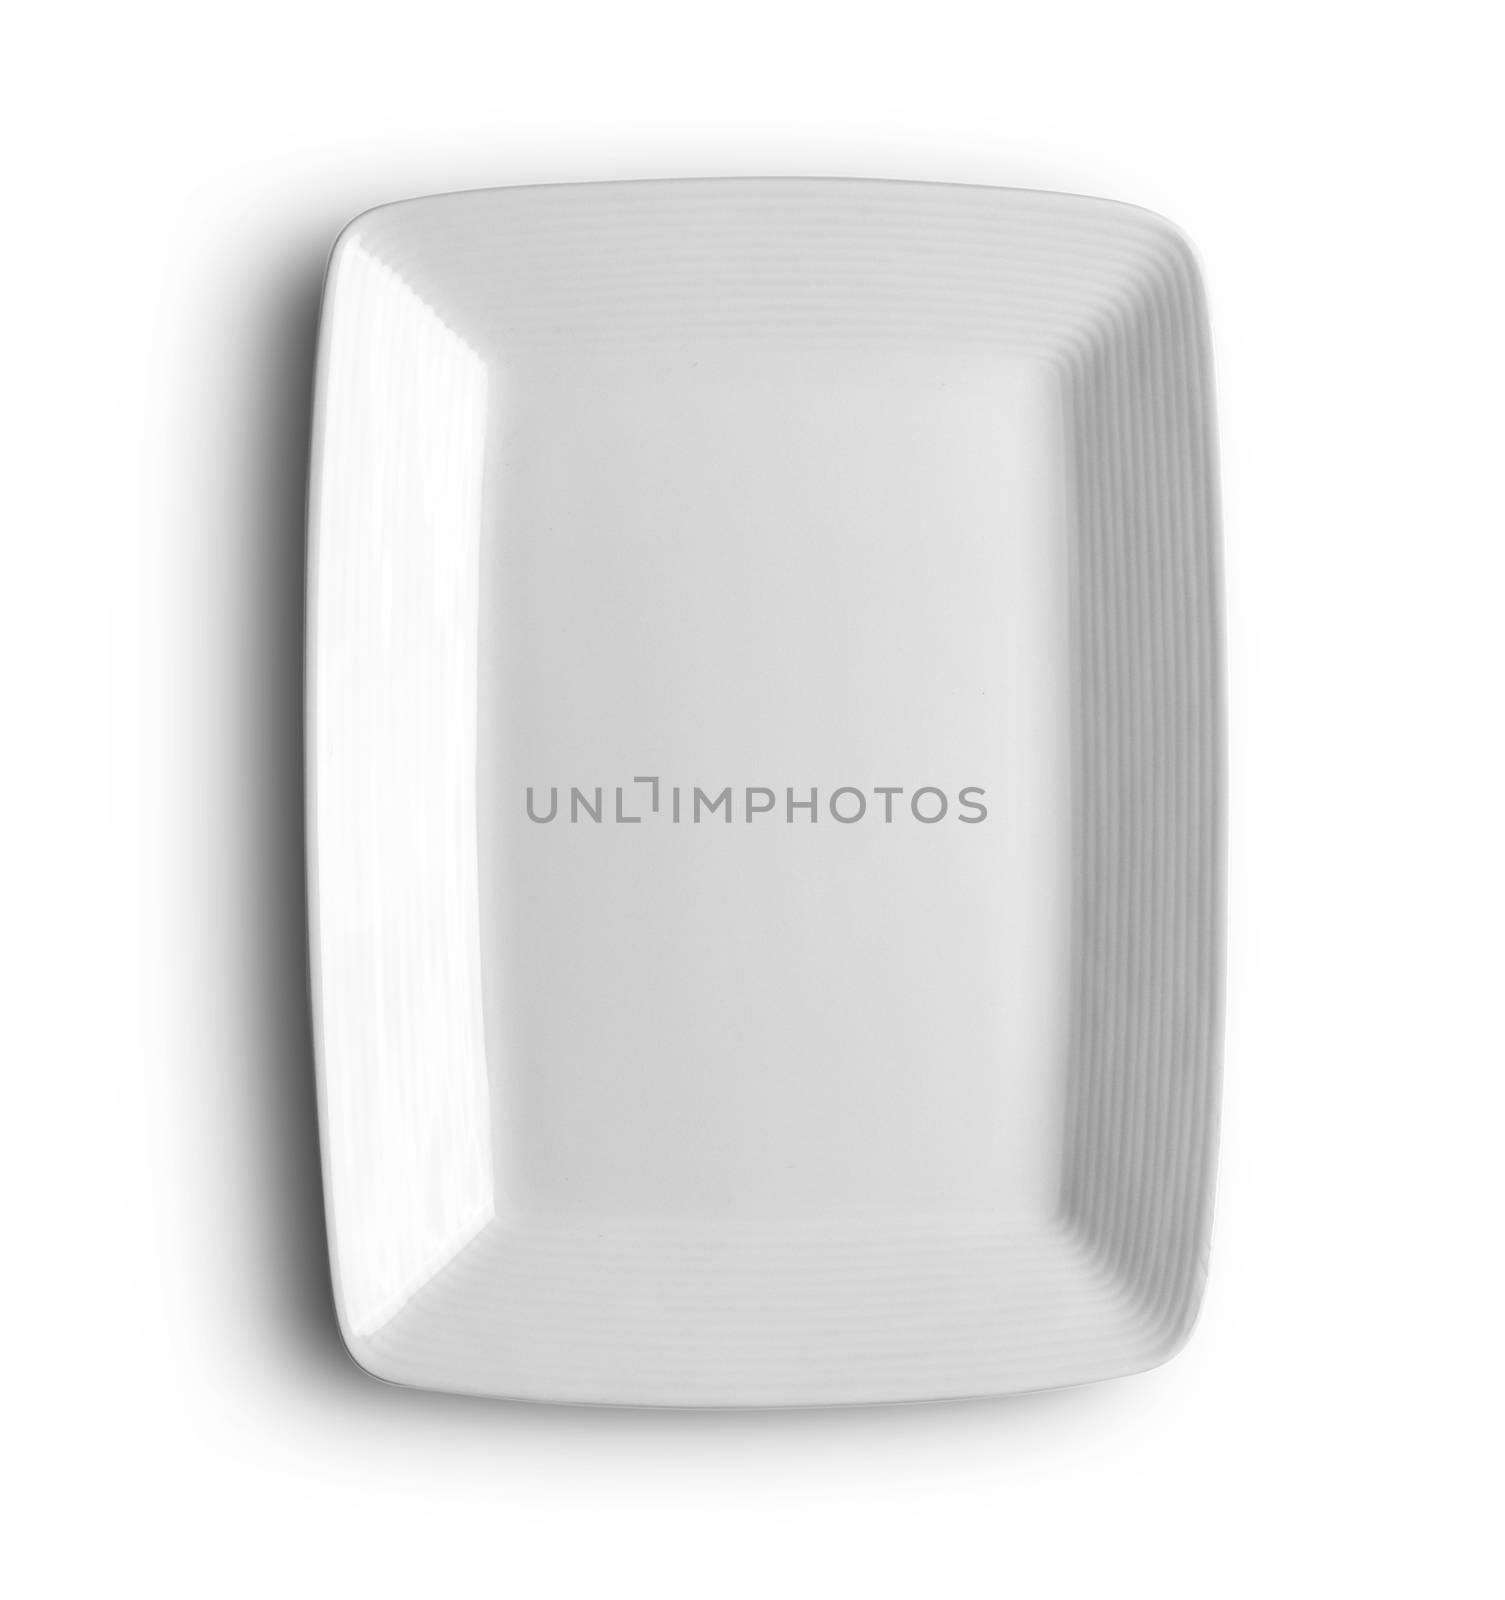 top view of white plate on white background